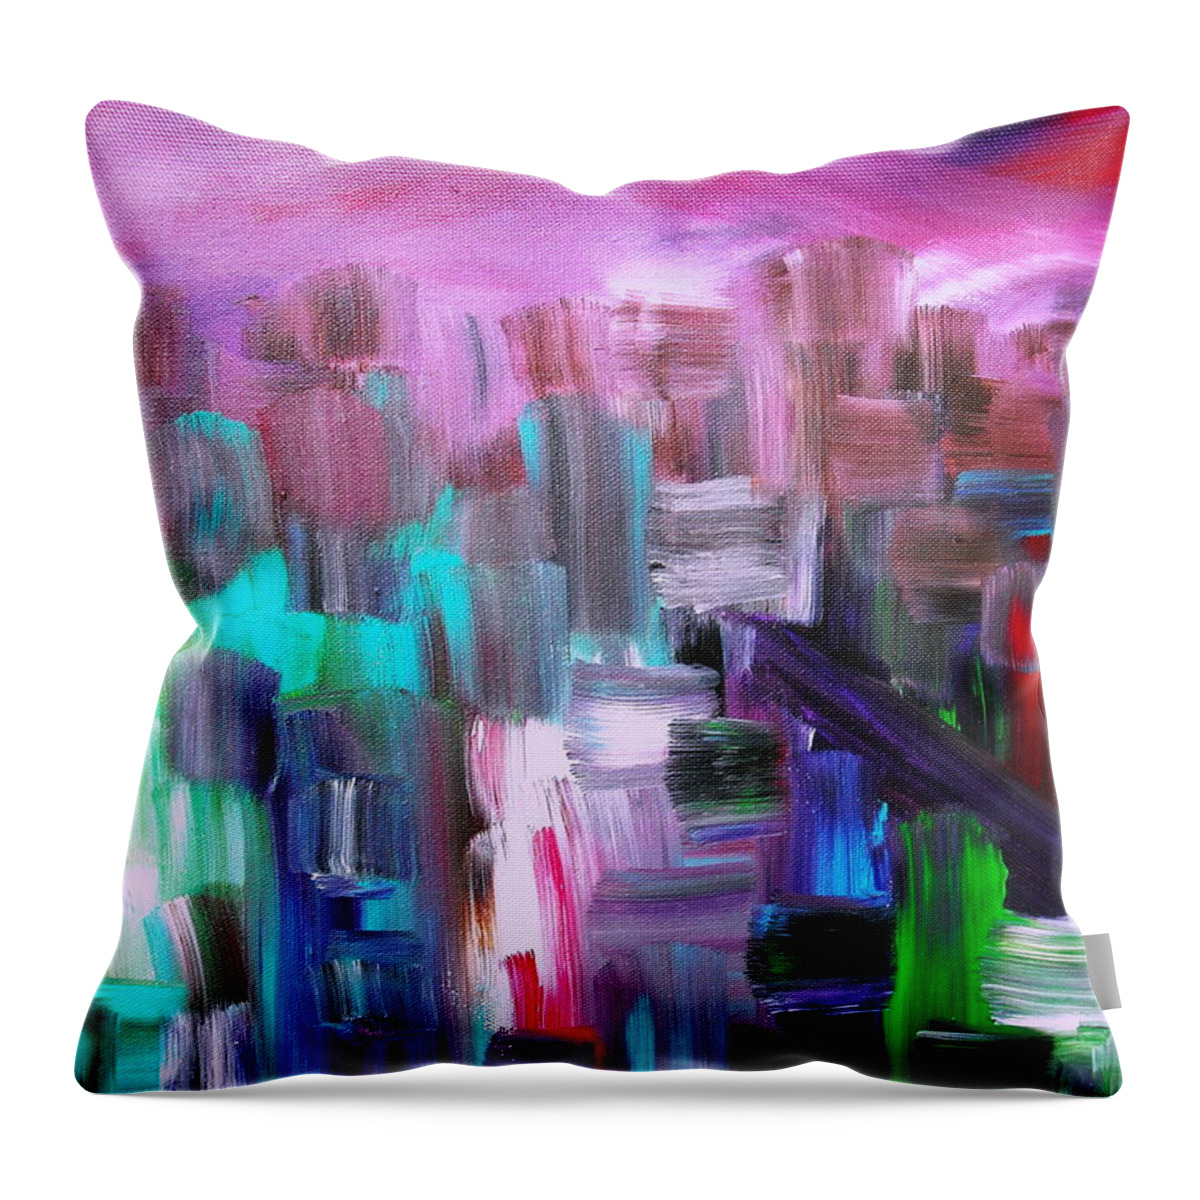 Acrylic Throw Pillow featuring the painting Abstract Cityscape I by Pristine Cartera Turkus